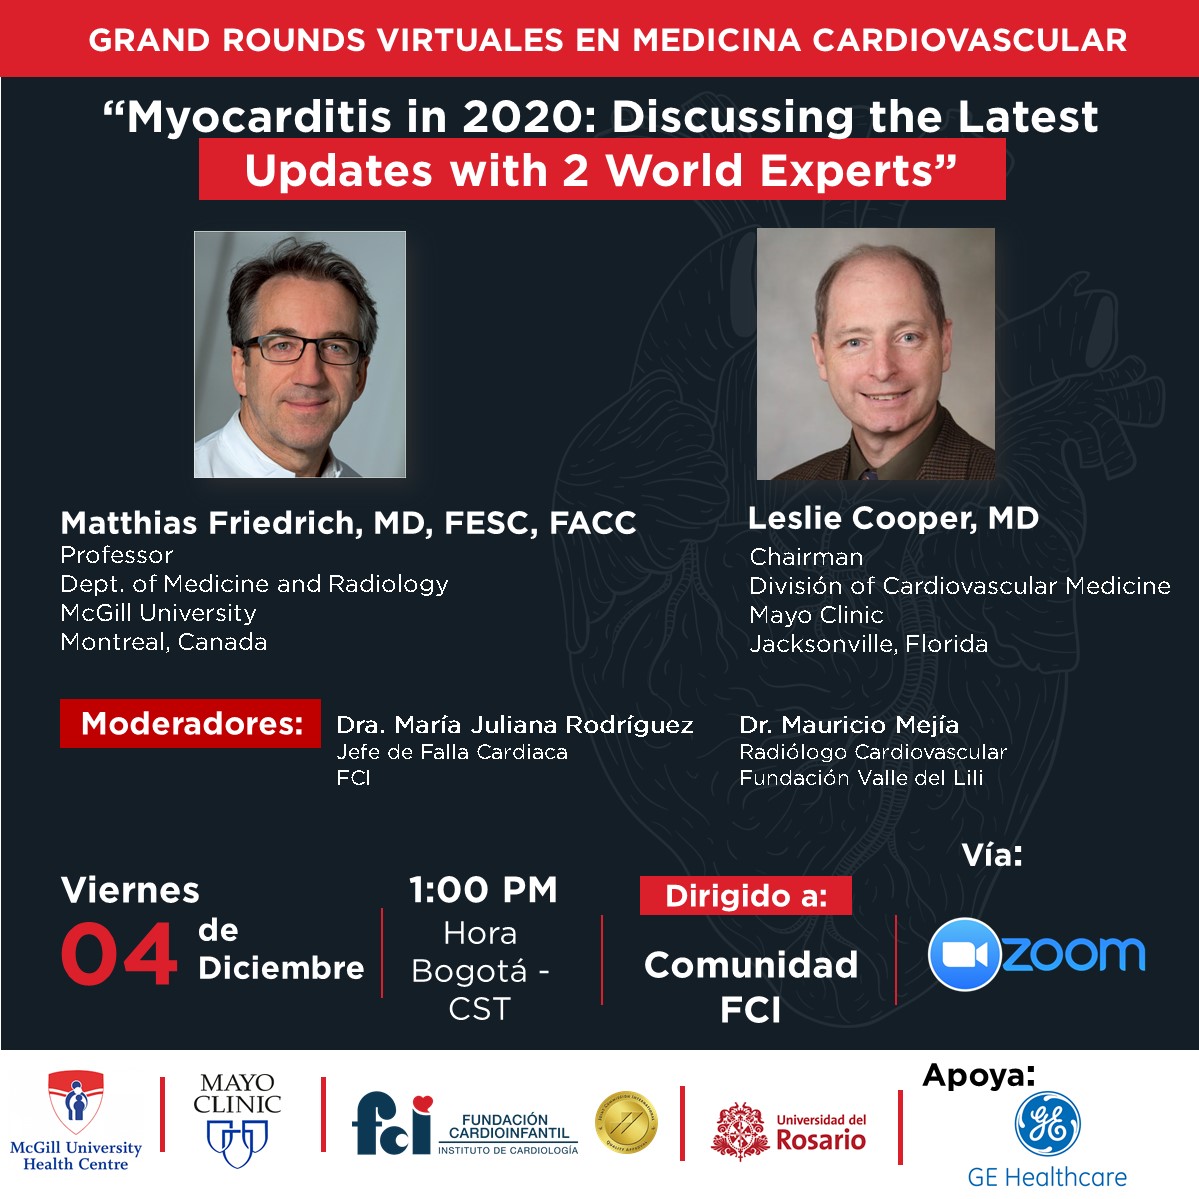 Webinar: “Myocarditis in 2020: Discussing the Latest Updates with 2 World Experts”